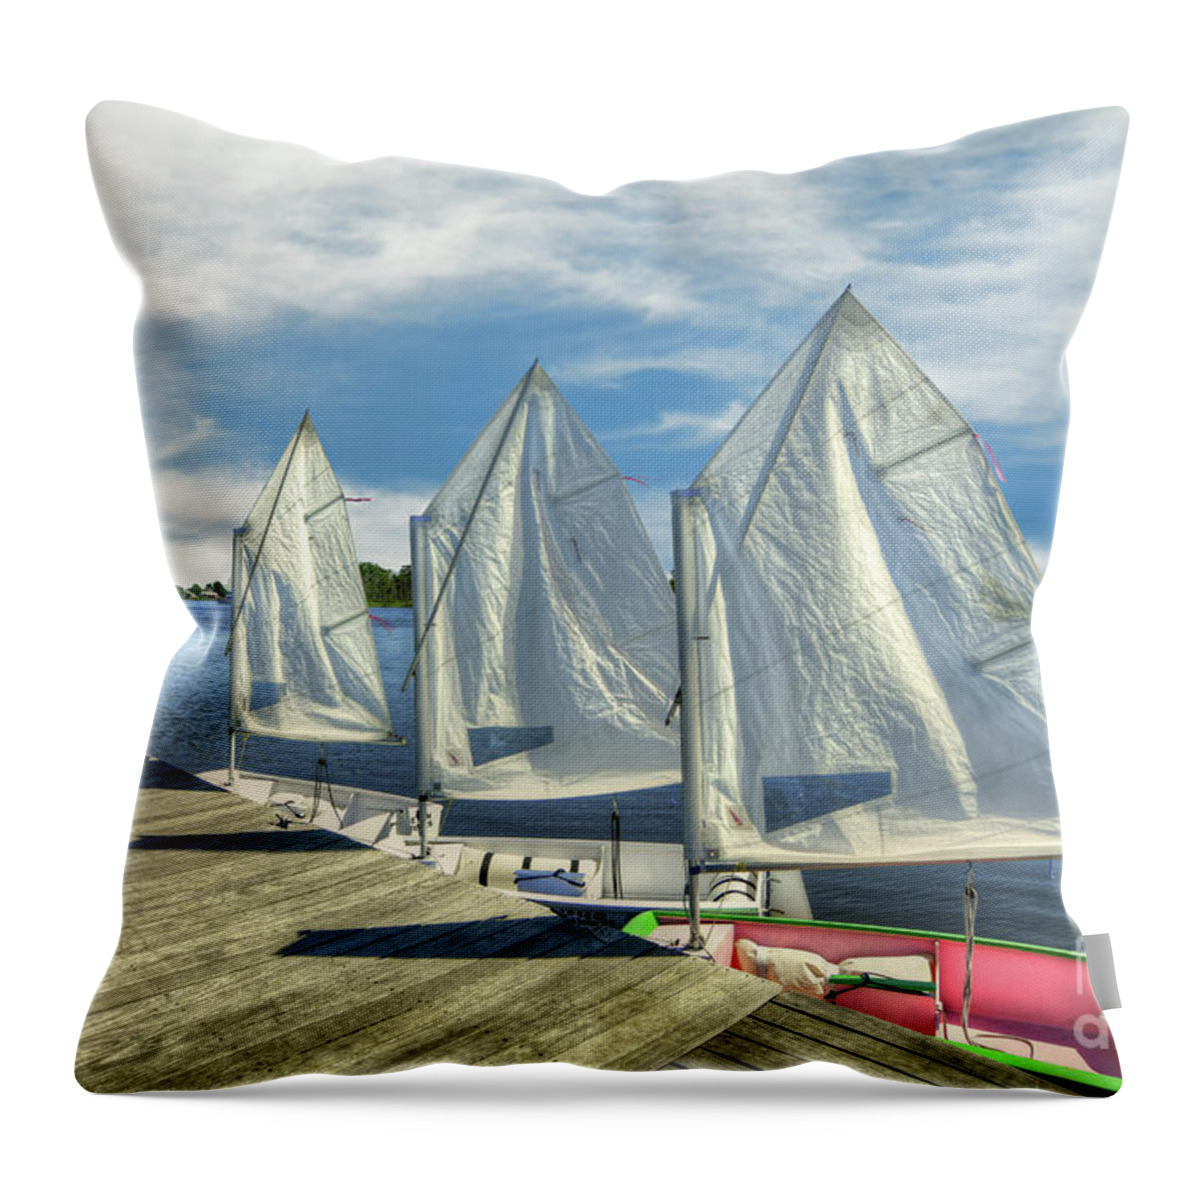 Nautical Throw Pillow featuring the photograph Little Sailboats by Kathy Baccari